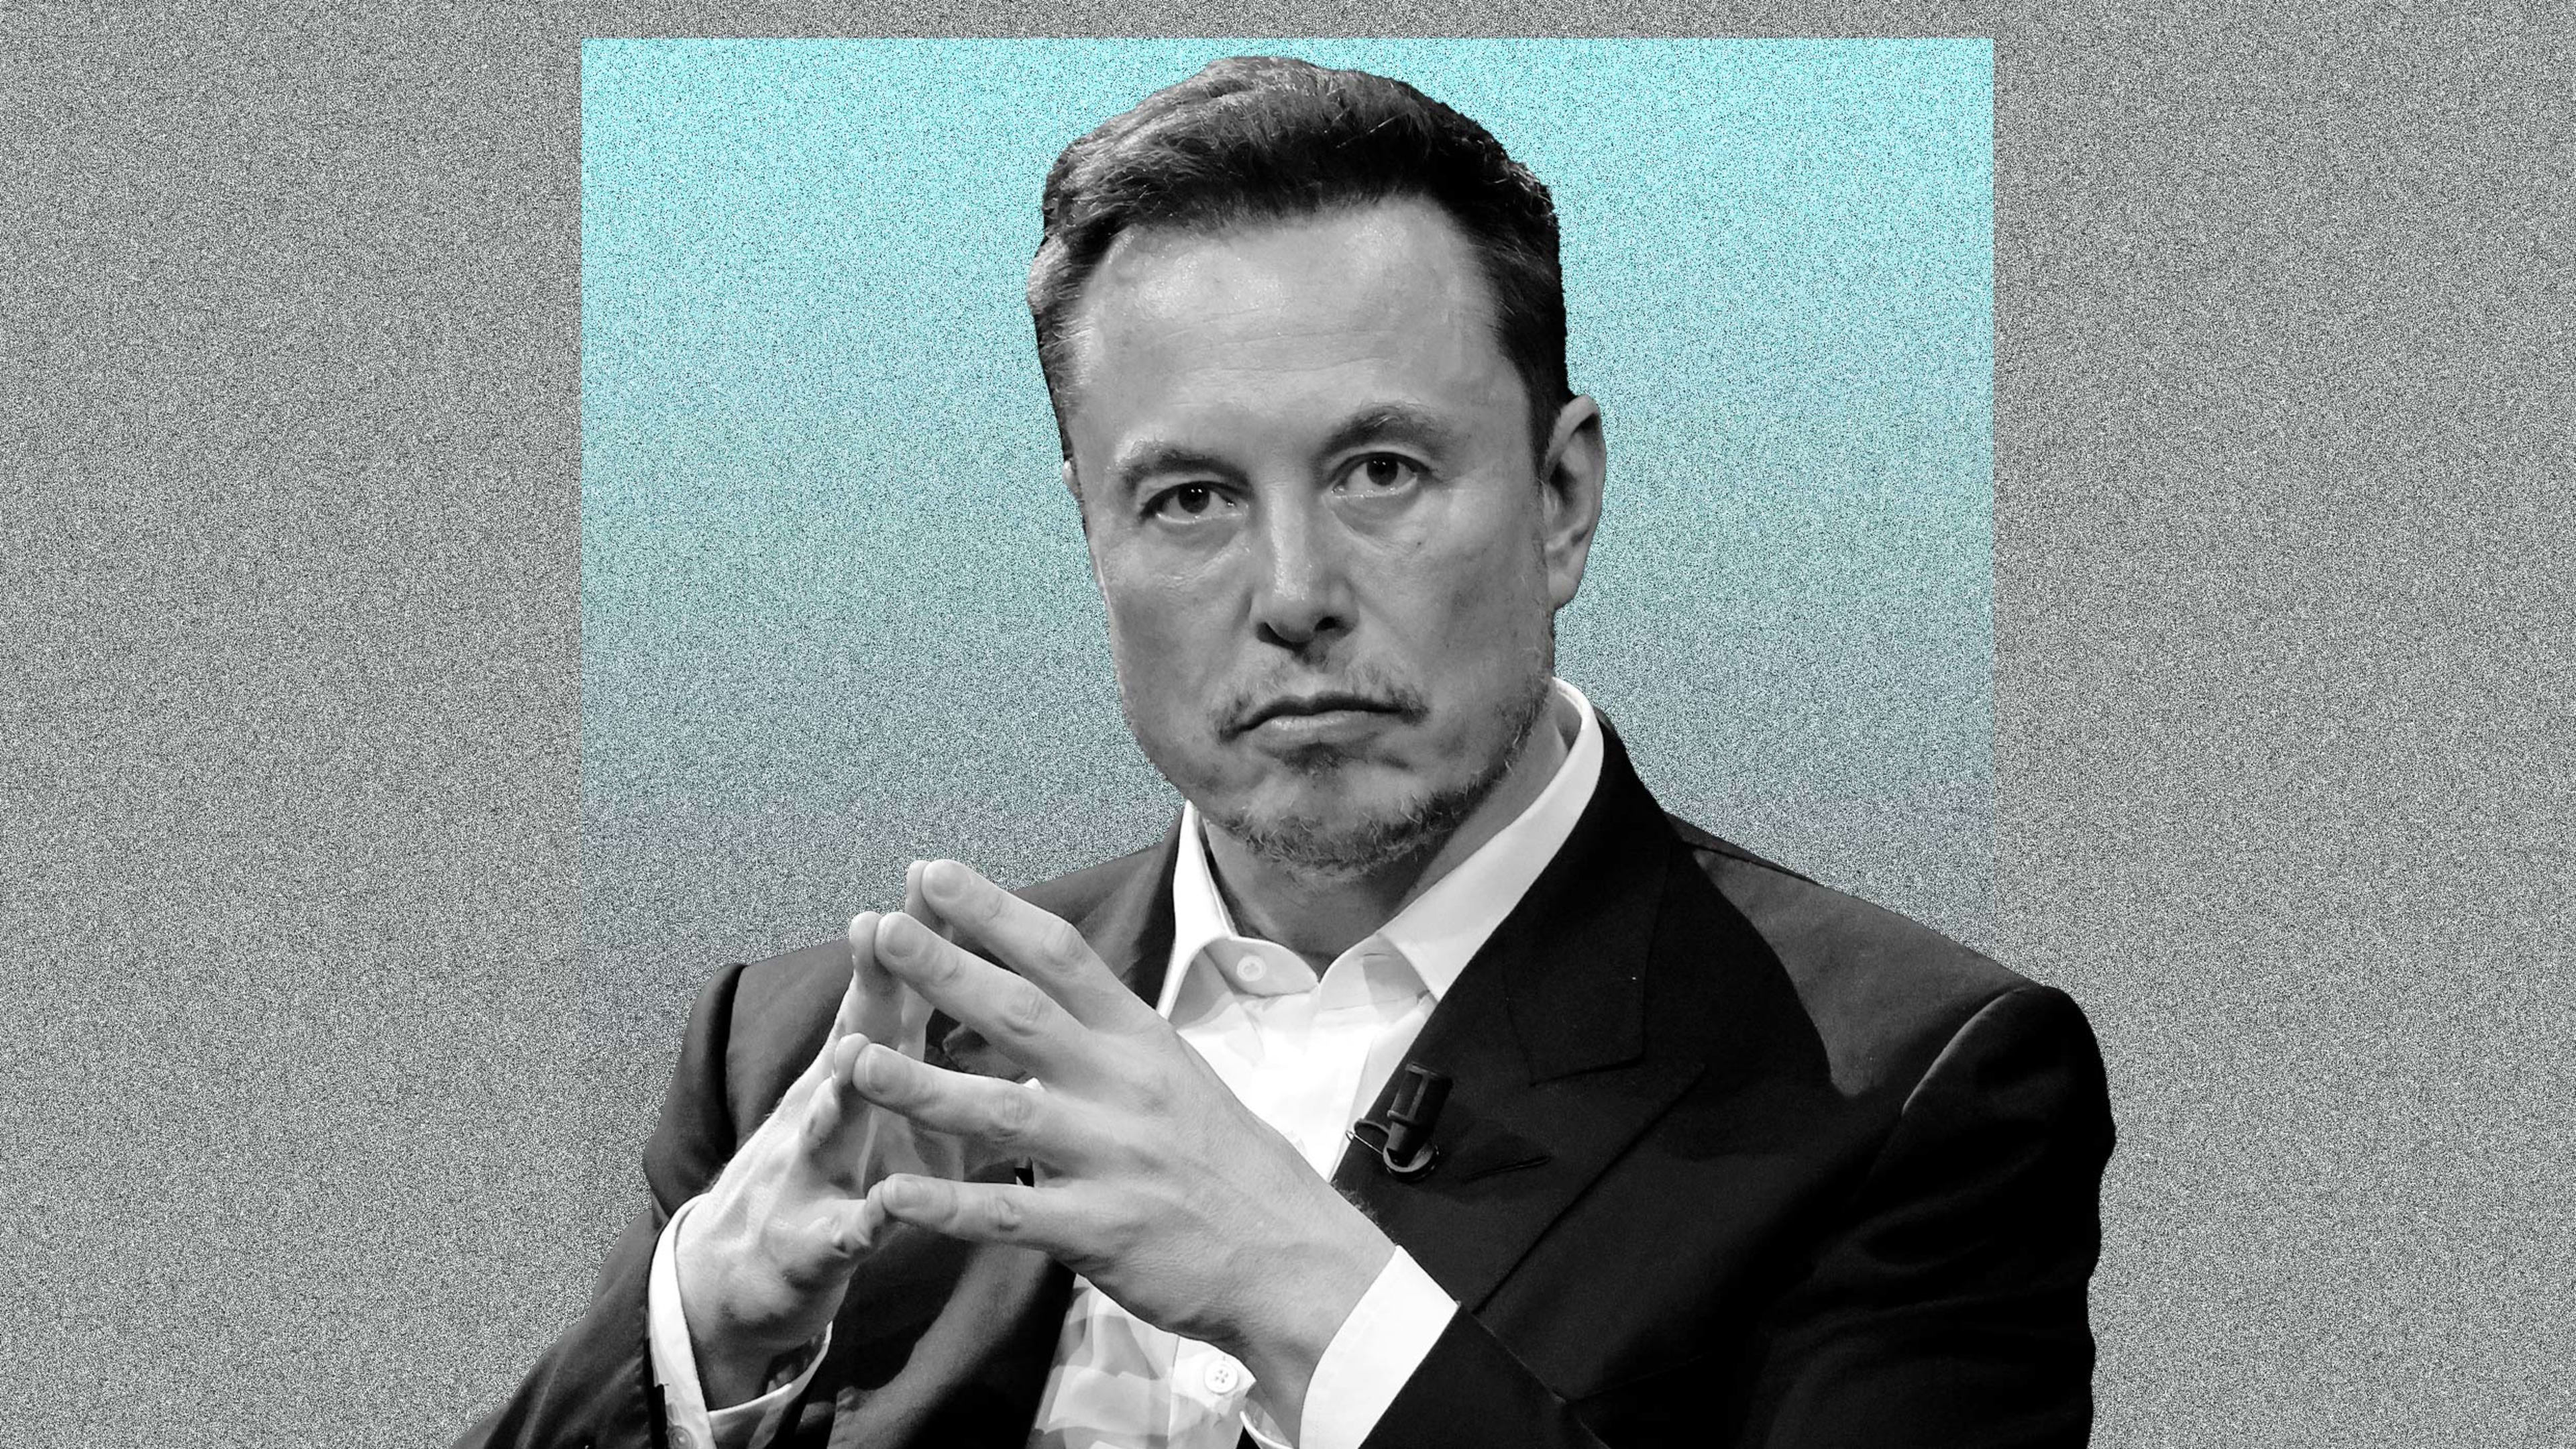 9 new revelations about Elon Musk from Walter Isaacson’s biography